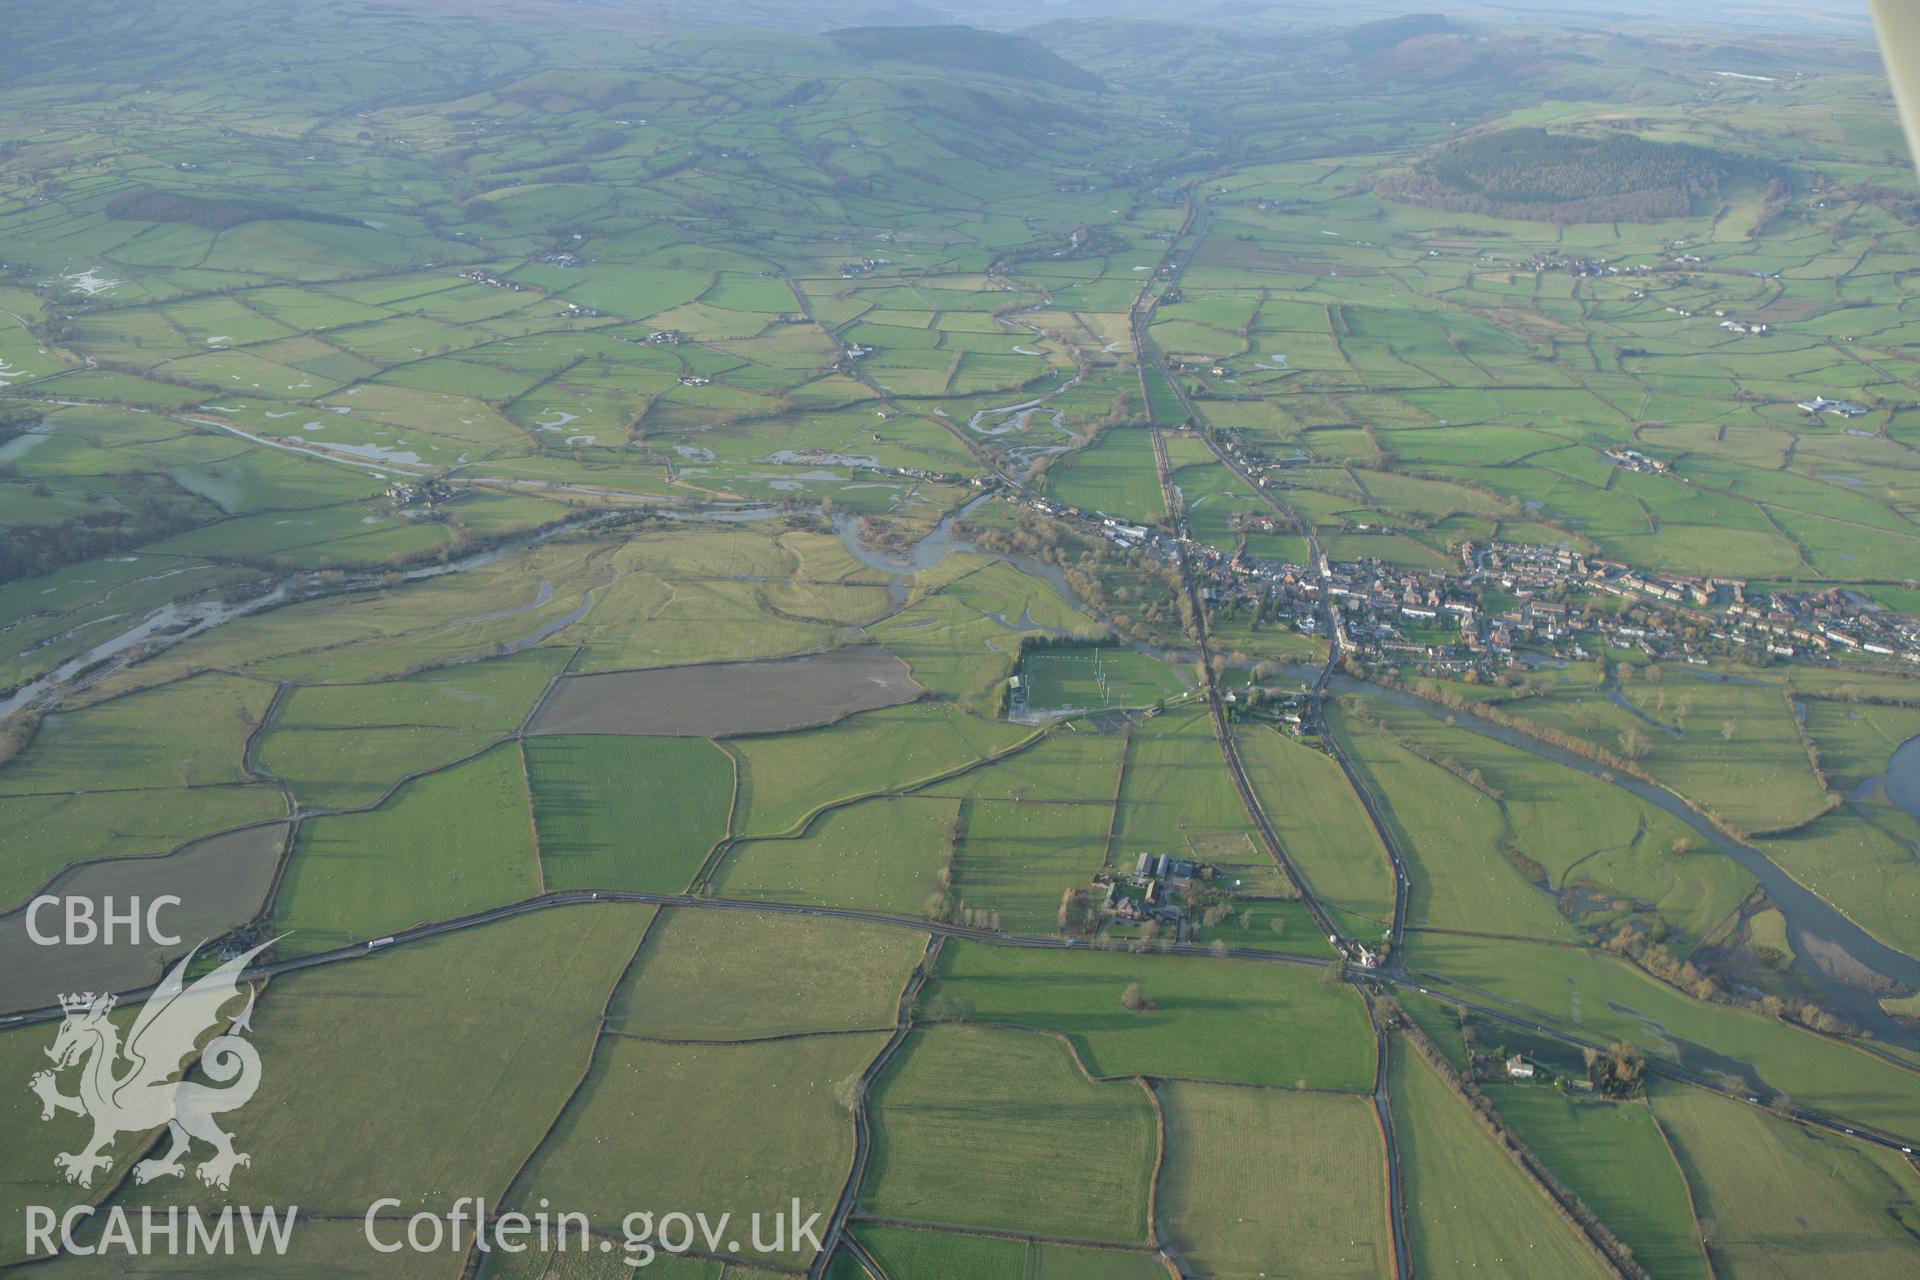 RCAHMW colour oblique photograph of Caersws, view from South. Taken by Toby Driver on 11/12/2007.